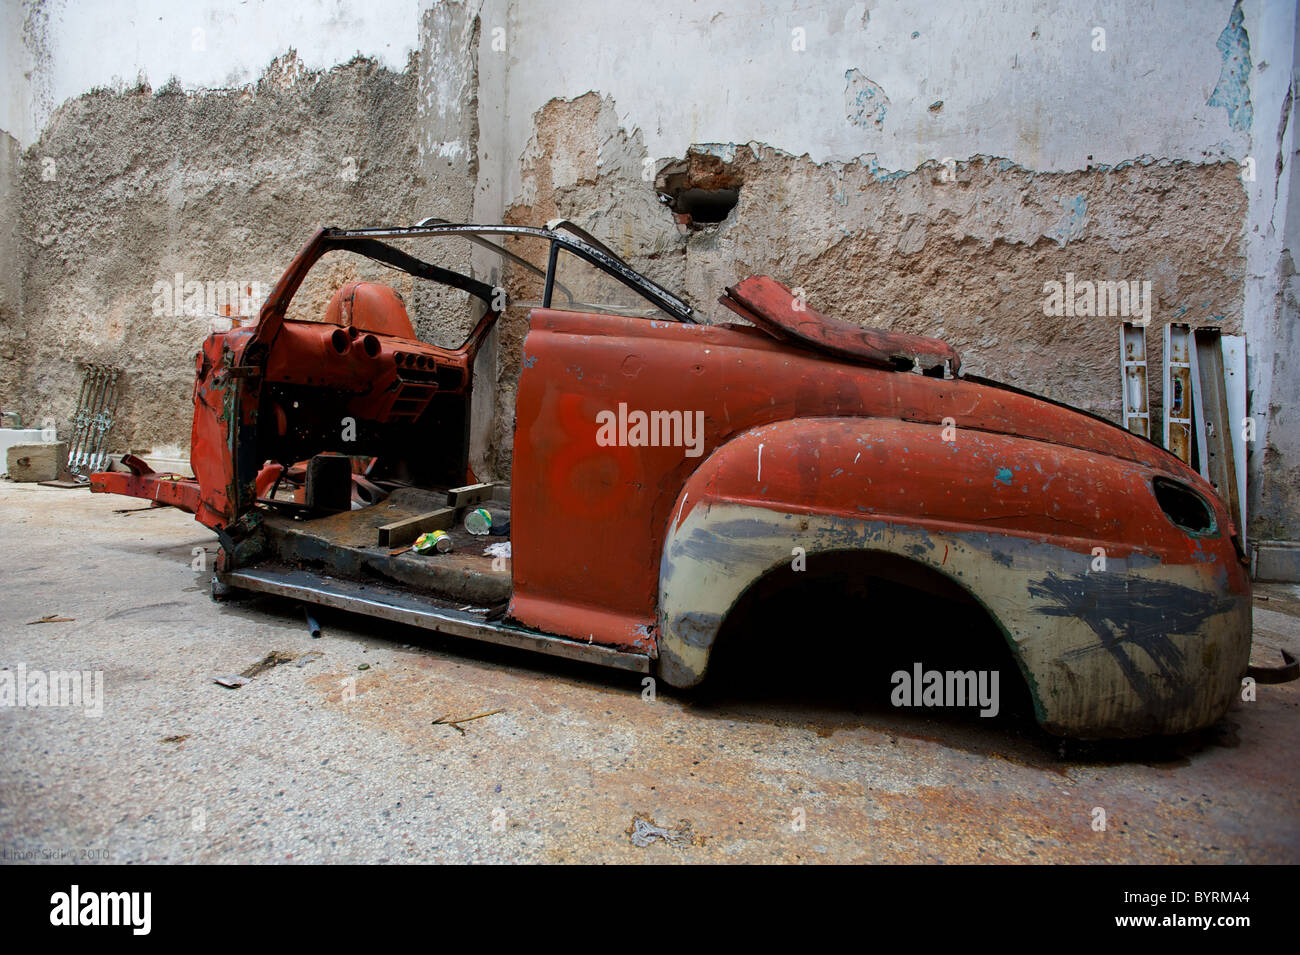 Remains of An old American car in a Cuban garage in Havana. Stock Photo